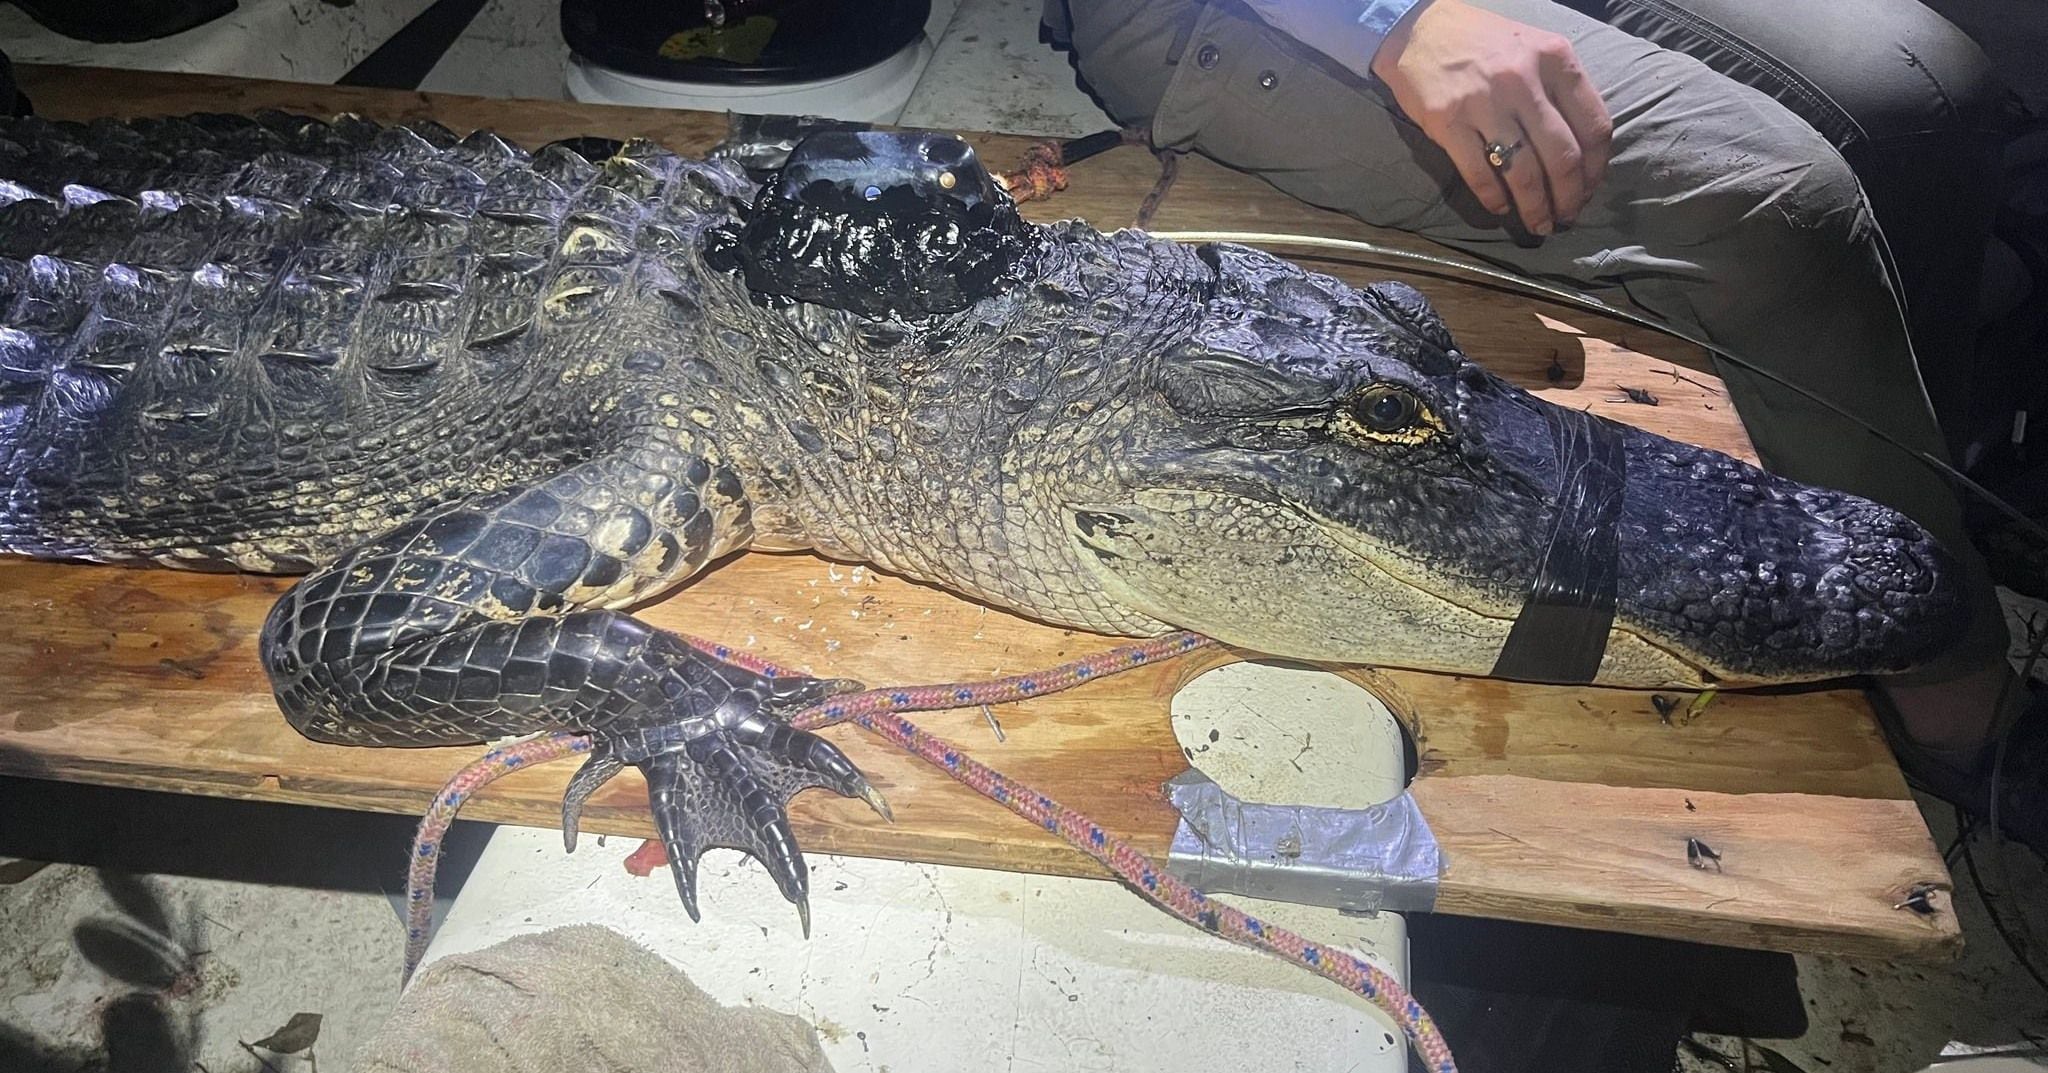 Alligator Woman Porn - 8-foot gator in Georgia swamp 'chased' out of territory by a bigger threat  â€“ WSB-TV Channel 2 - Atlanta